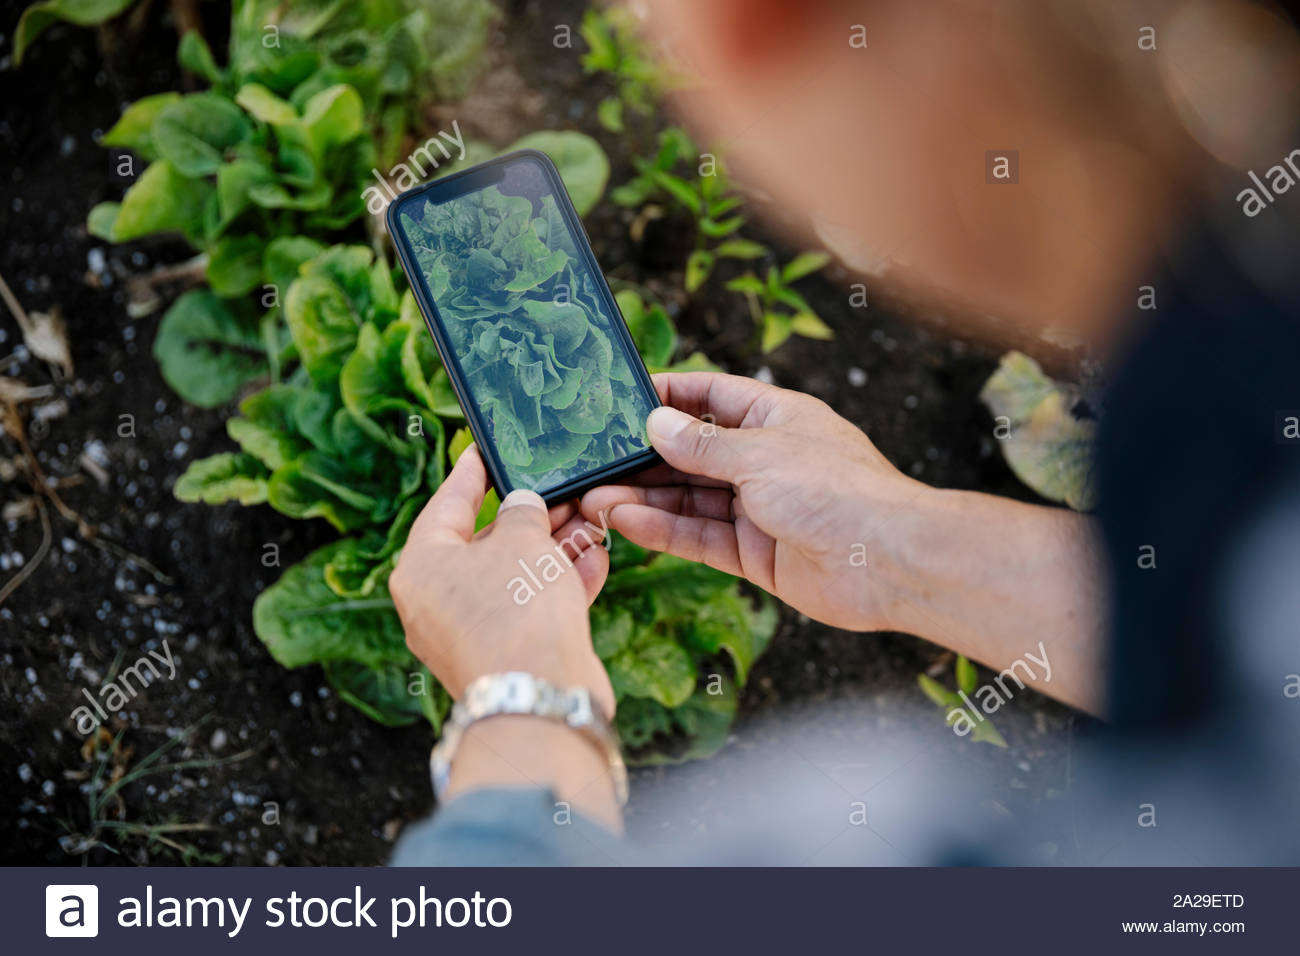 Man with camera phone photographing plant in garden Stock Photo